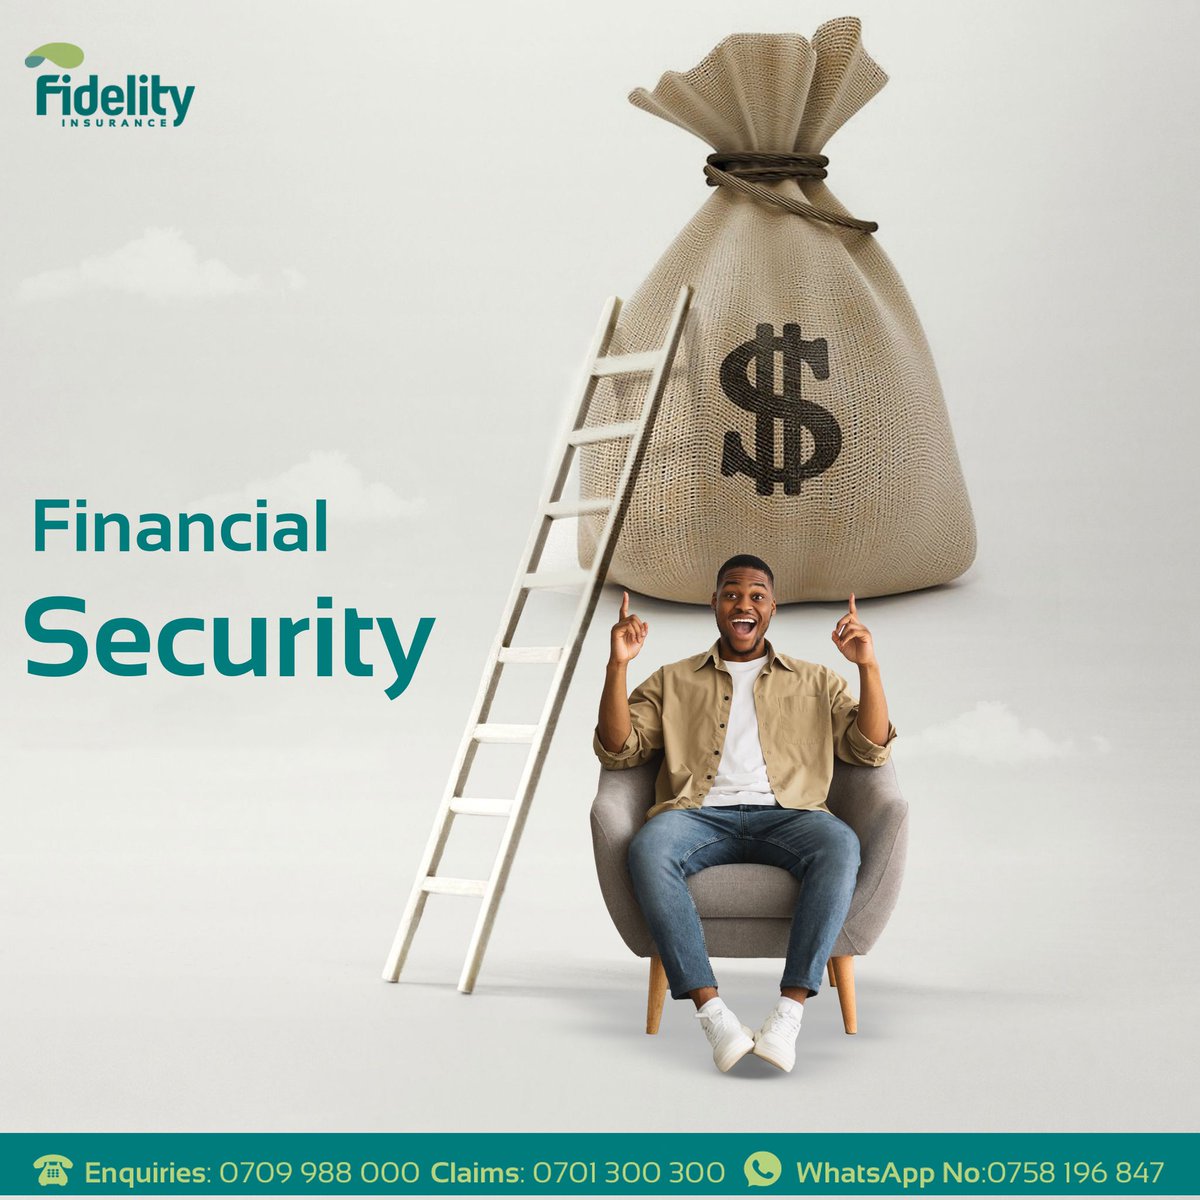 Fidelity insurance helps you understand your insurance needs and the available solutions we have for you.
Visit our website today to learn more with us! fidelityshield.com
#fidelityinsurance #insuranceyoucantrust #insurance #InsuranceBenefits